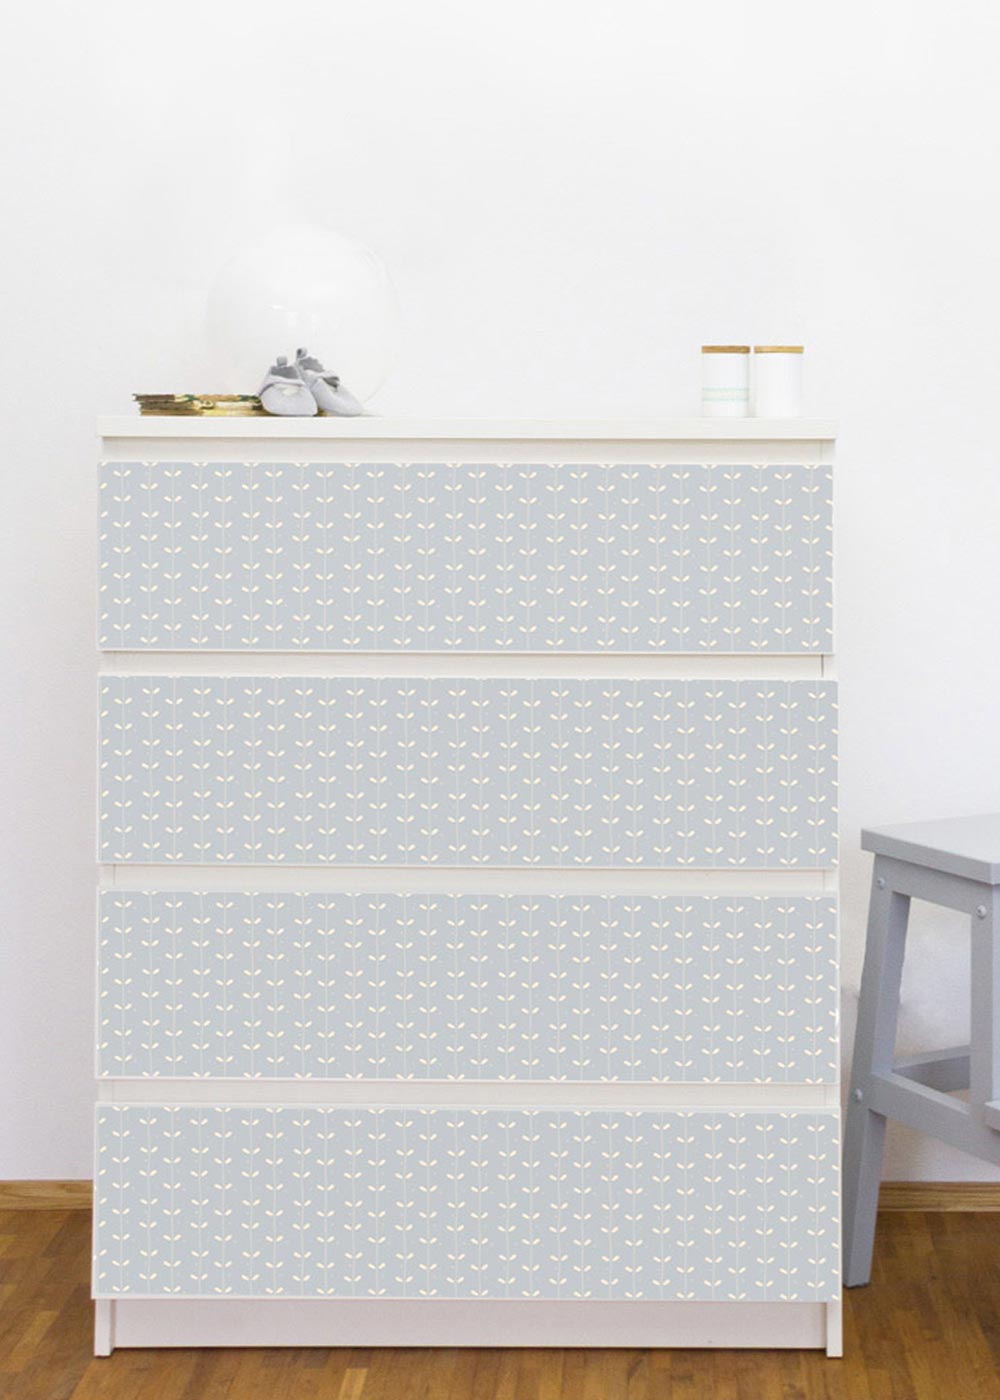 Ikea Malm Dresser Ährig ice blue general view